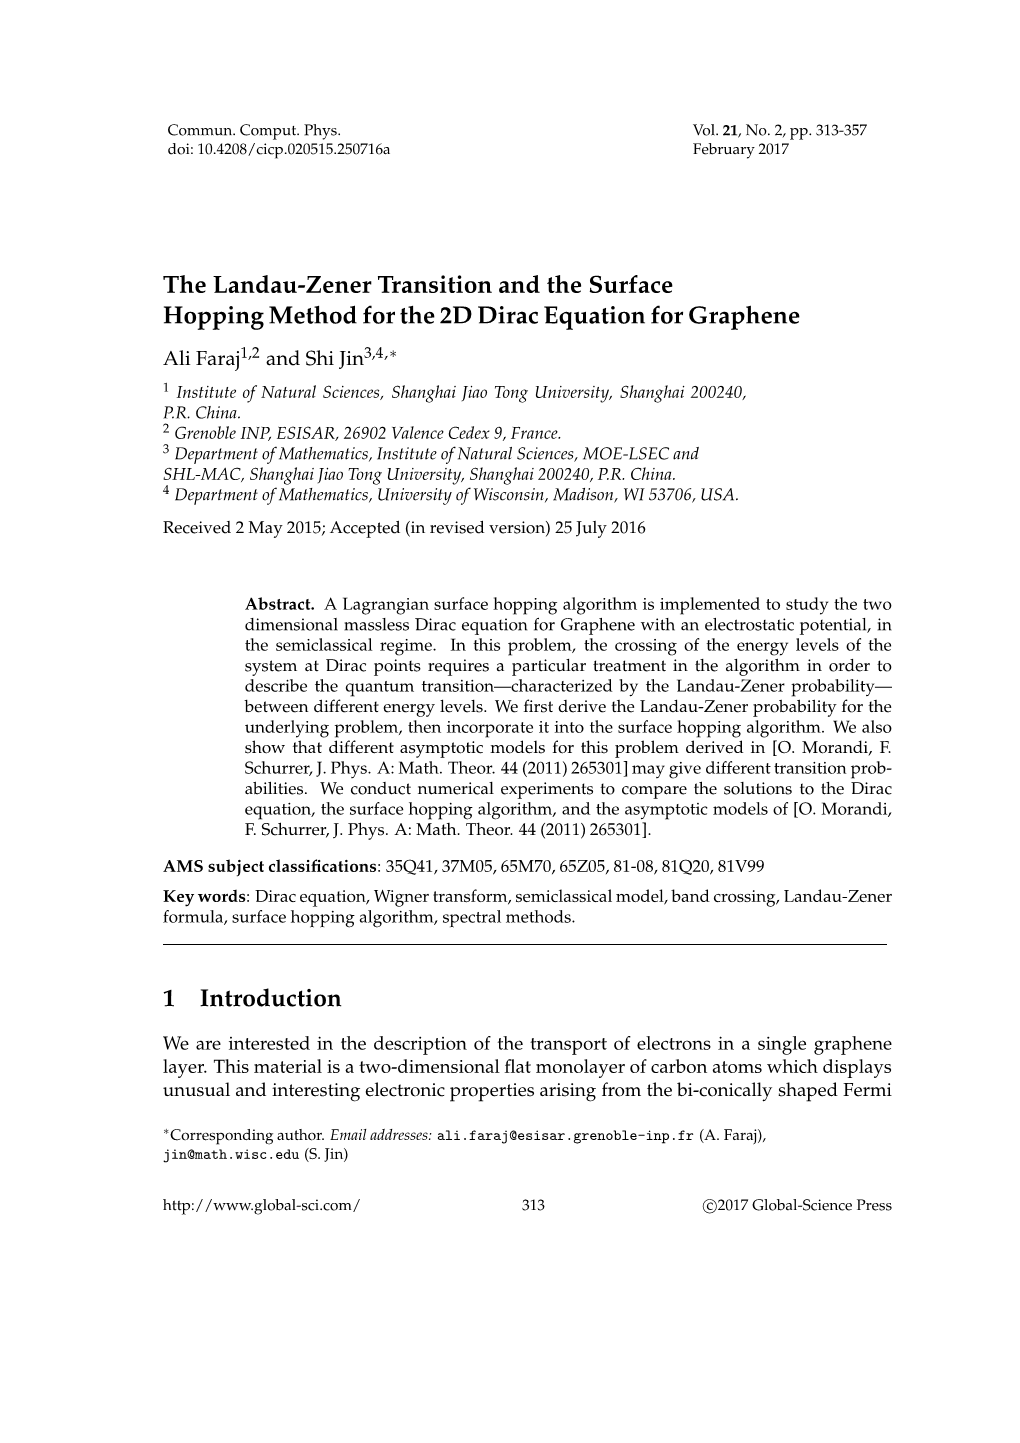 The Landau-Zener Transition and the Surface Hopping Method for the 2D Dirac Equation for Graphene